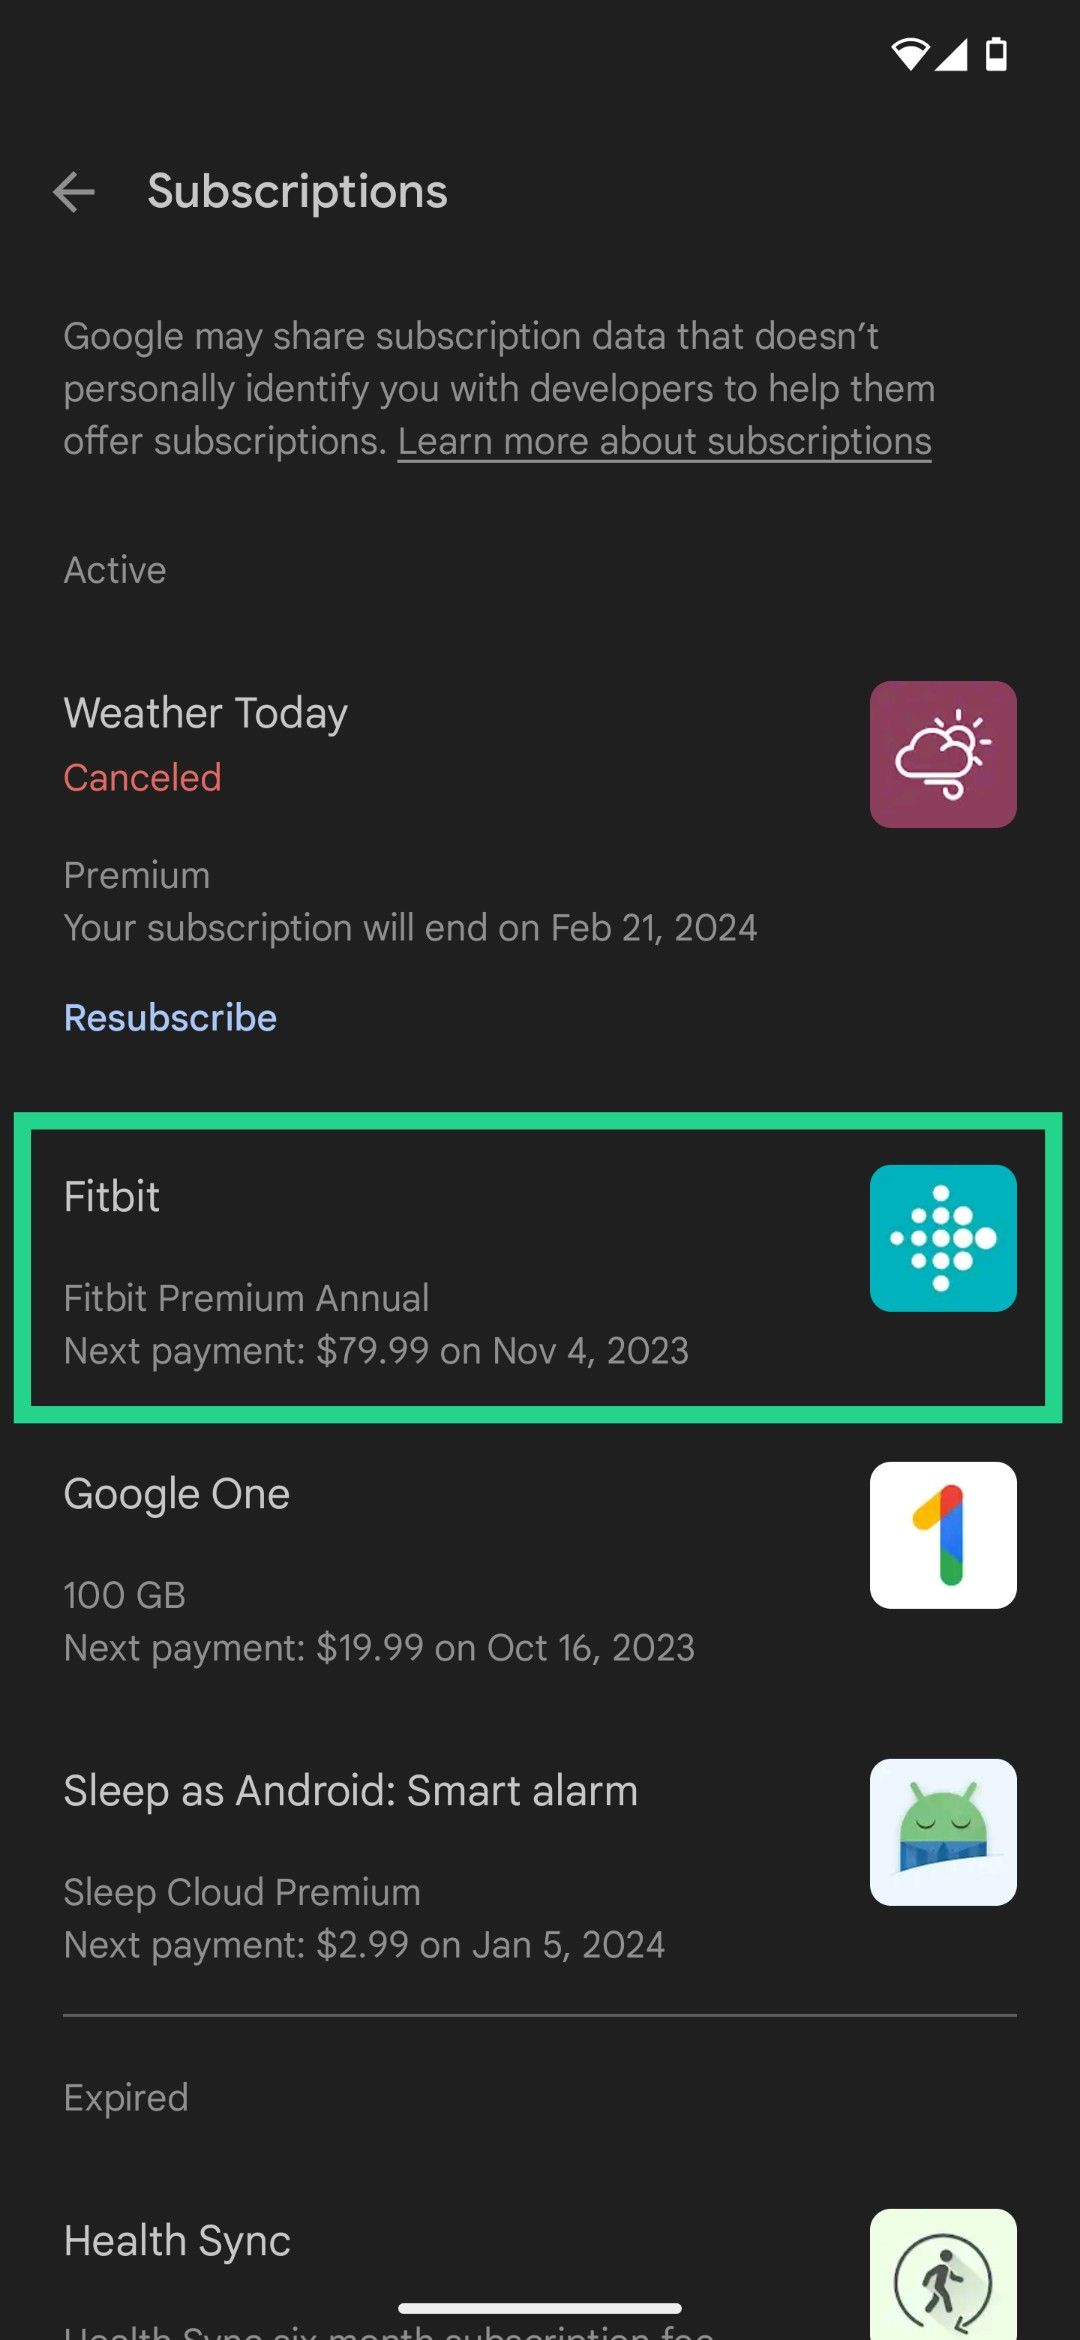 The Google Play Store's Subscriptions menu, with Fitbit highlighted